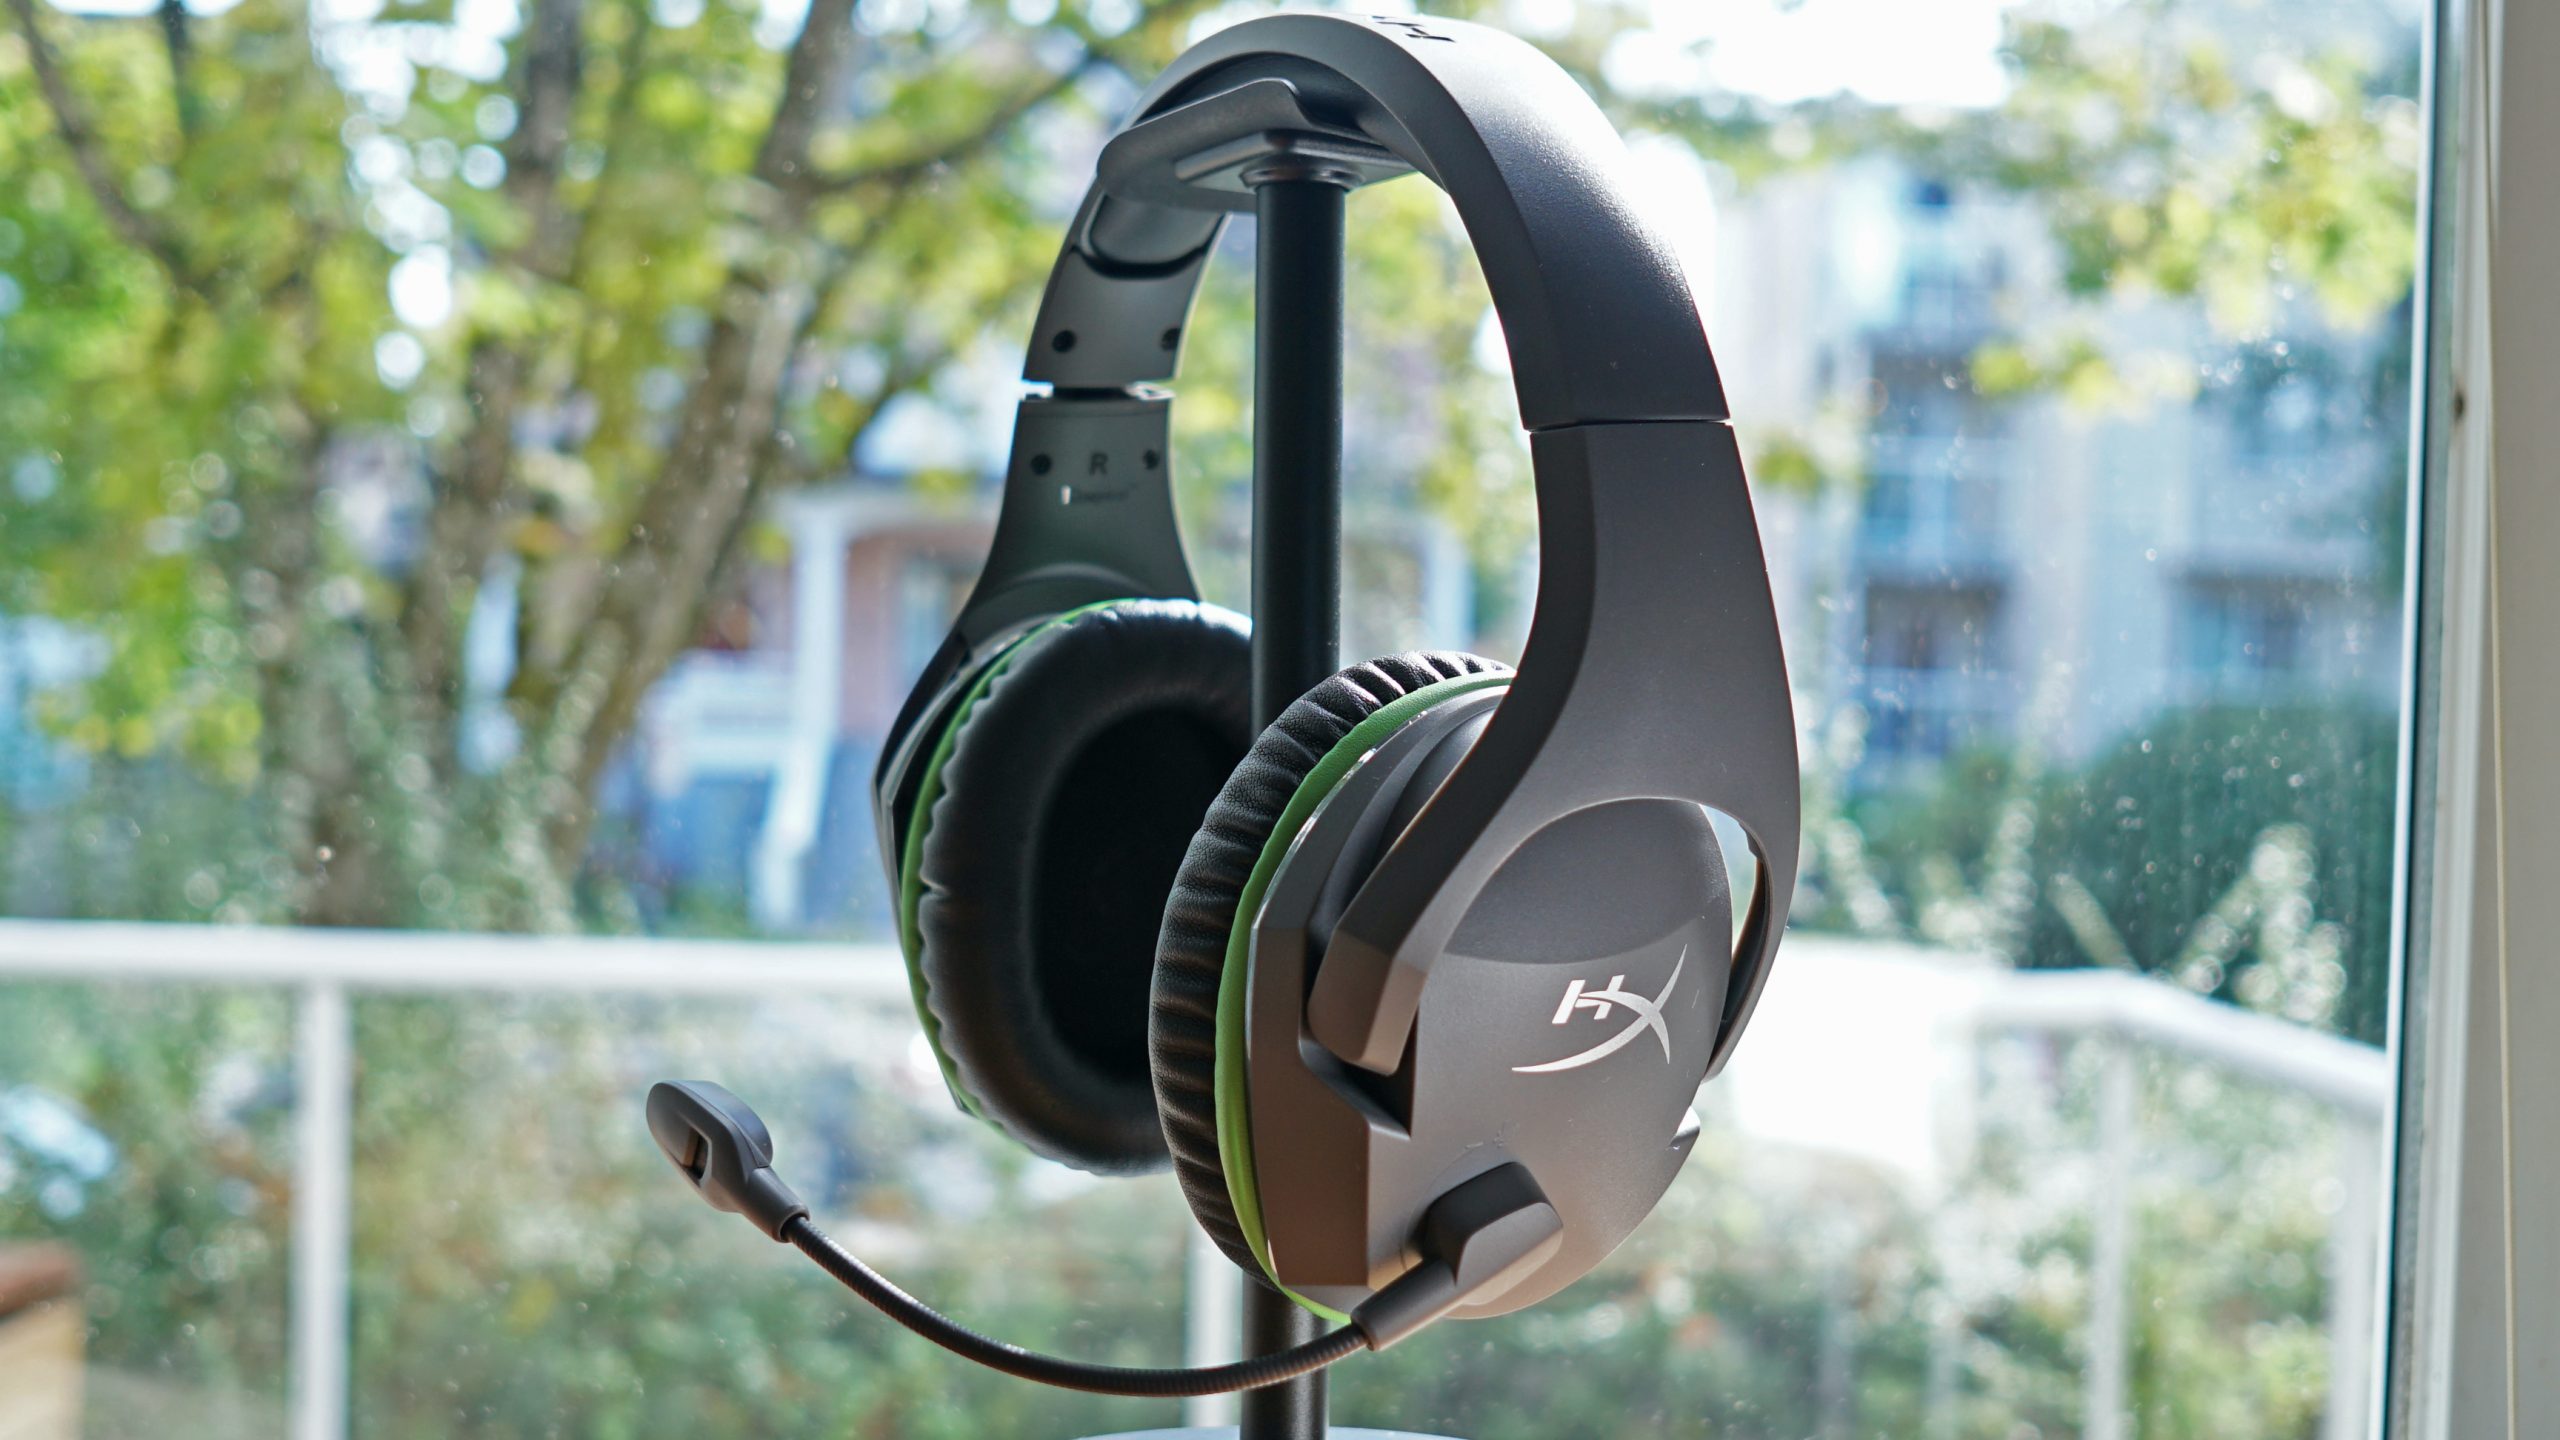 The HyperX CloudX Stinger Core sits on a headphone stand by a window